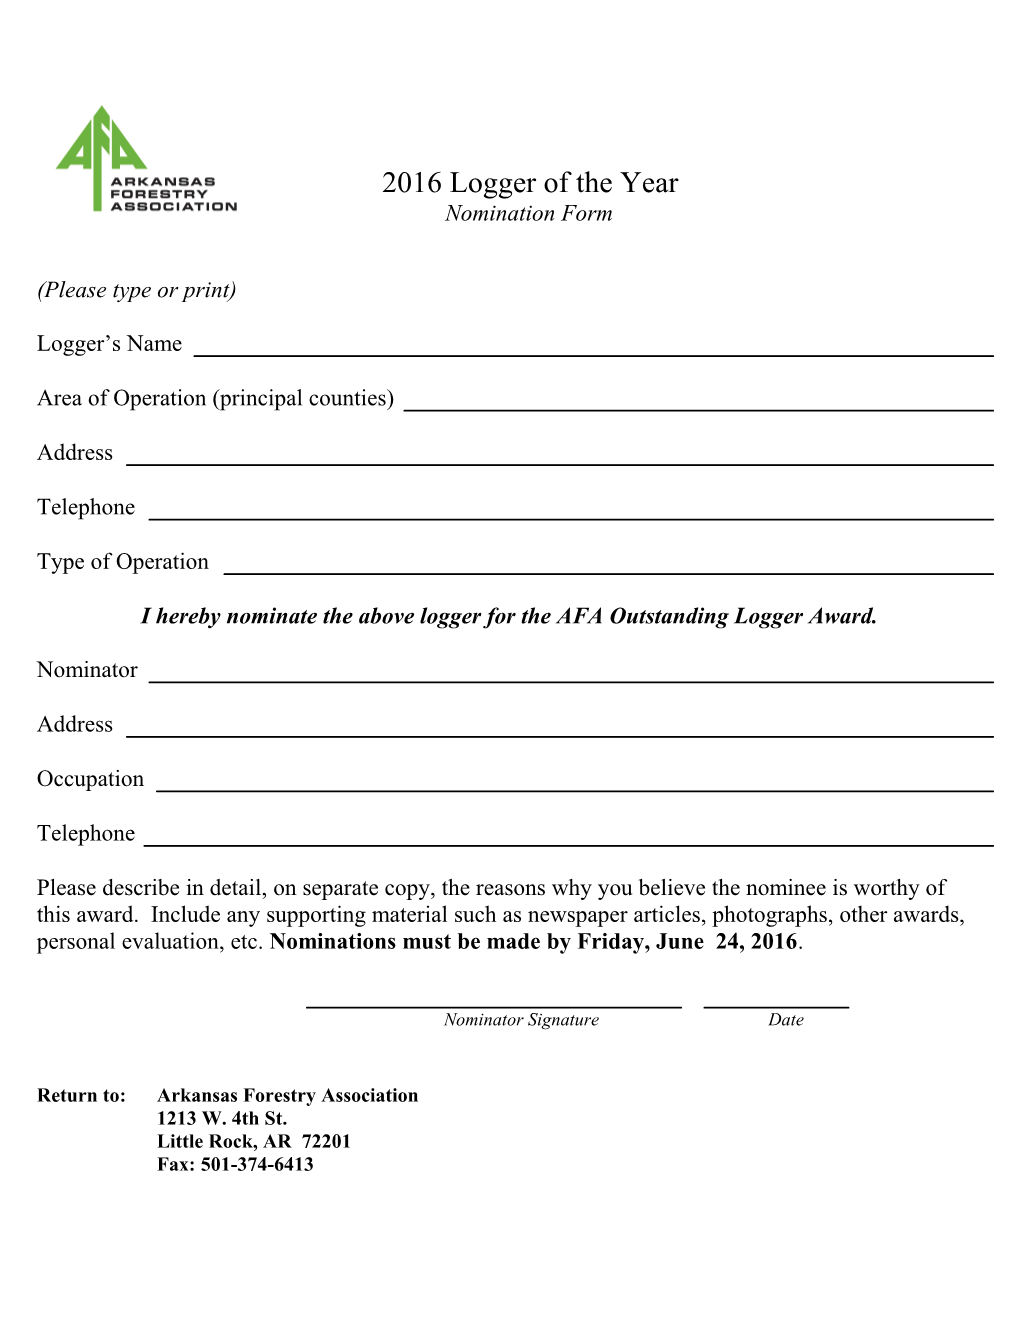 2016 Logger of the Year Nomination Form